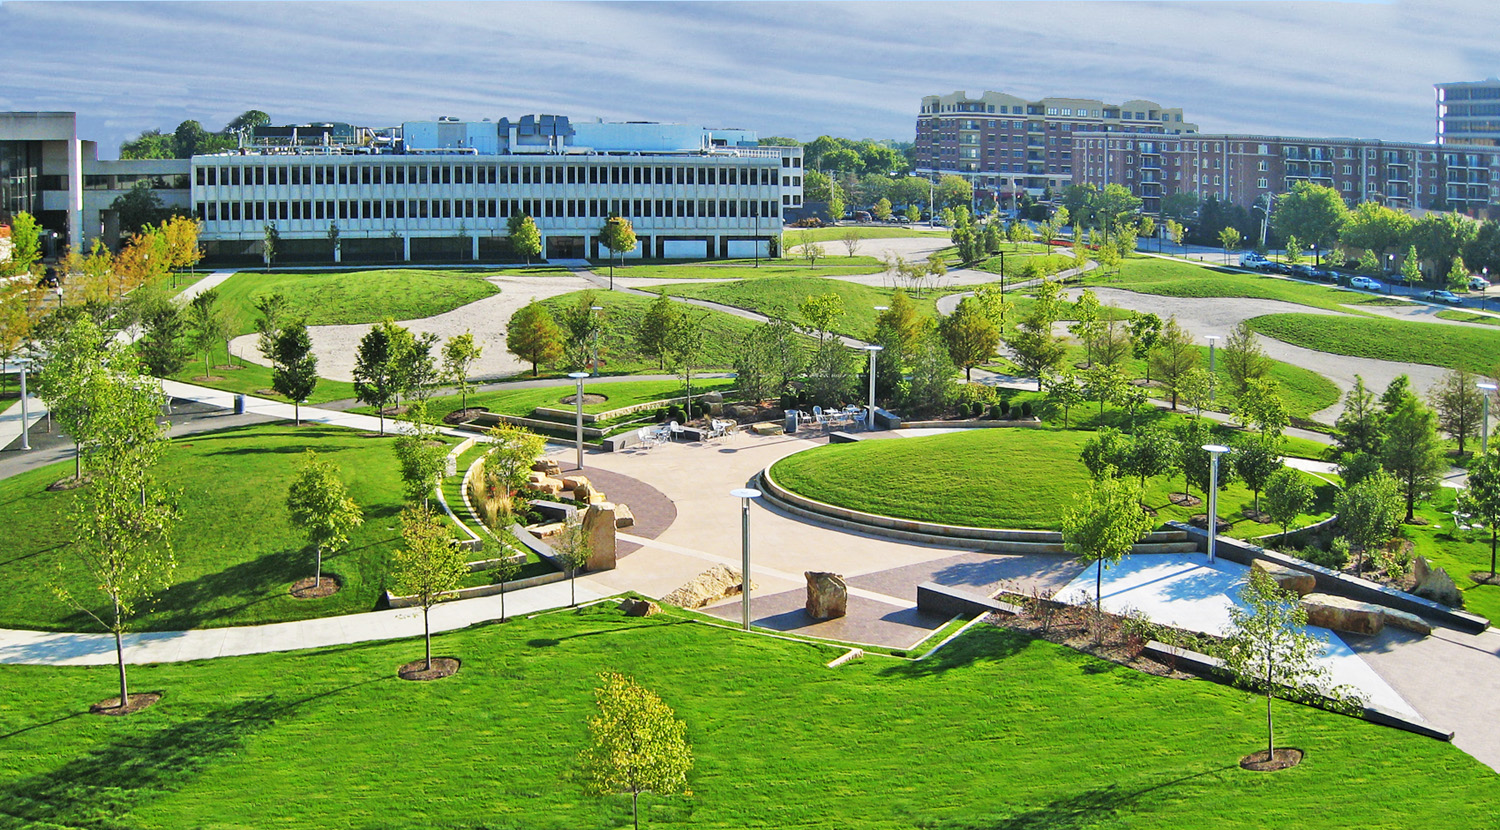 ILLINOIS SCIENCE AND TECHNOLOGY PARK